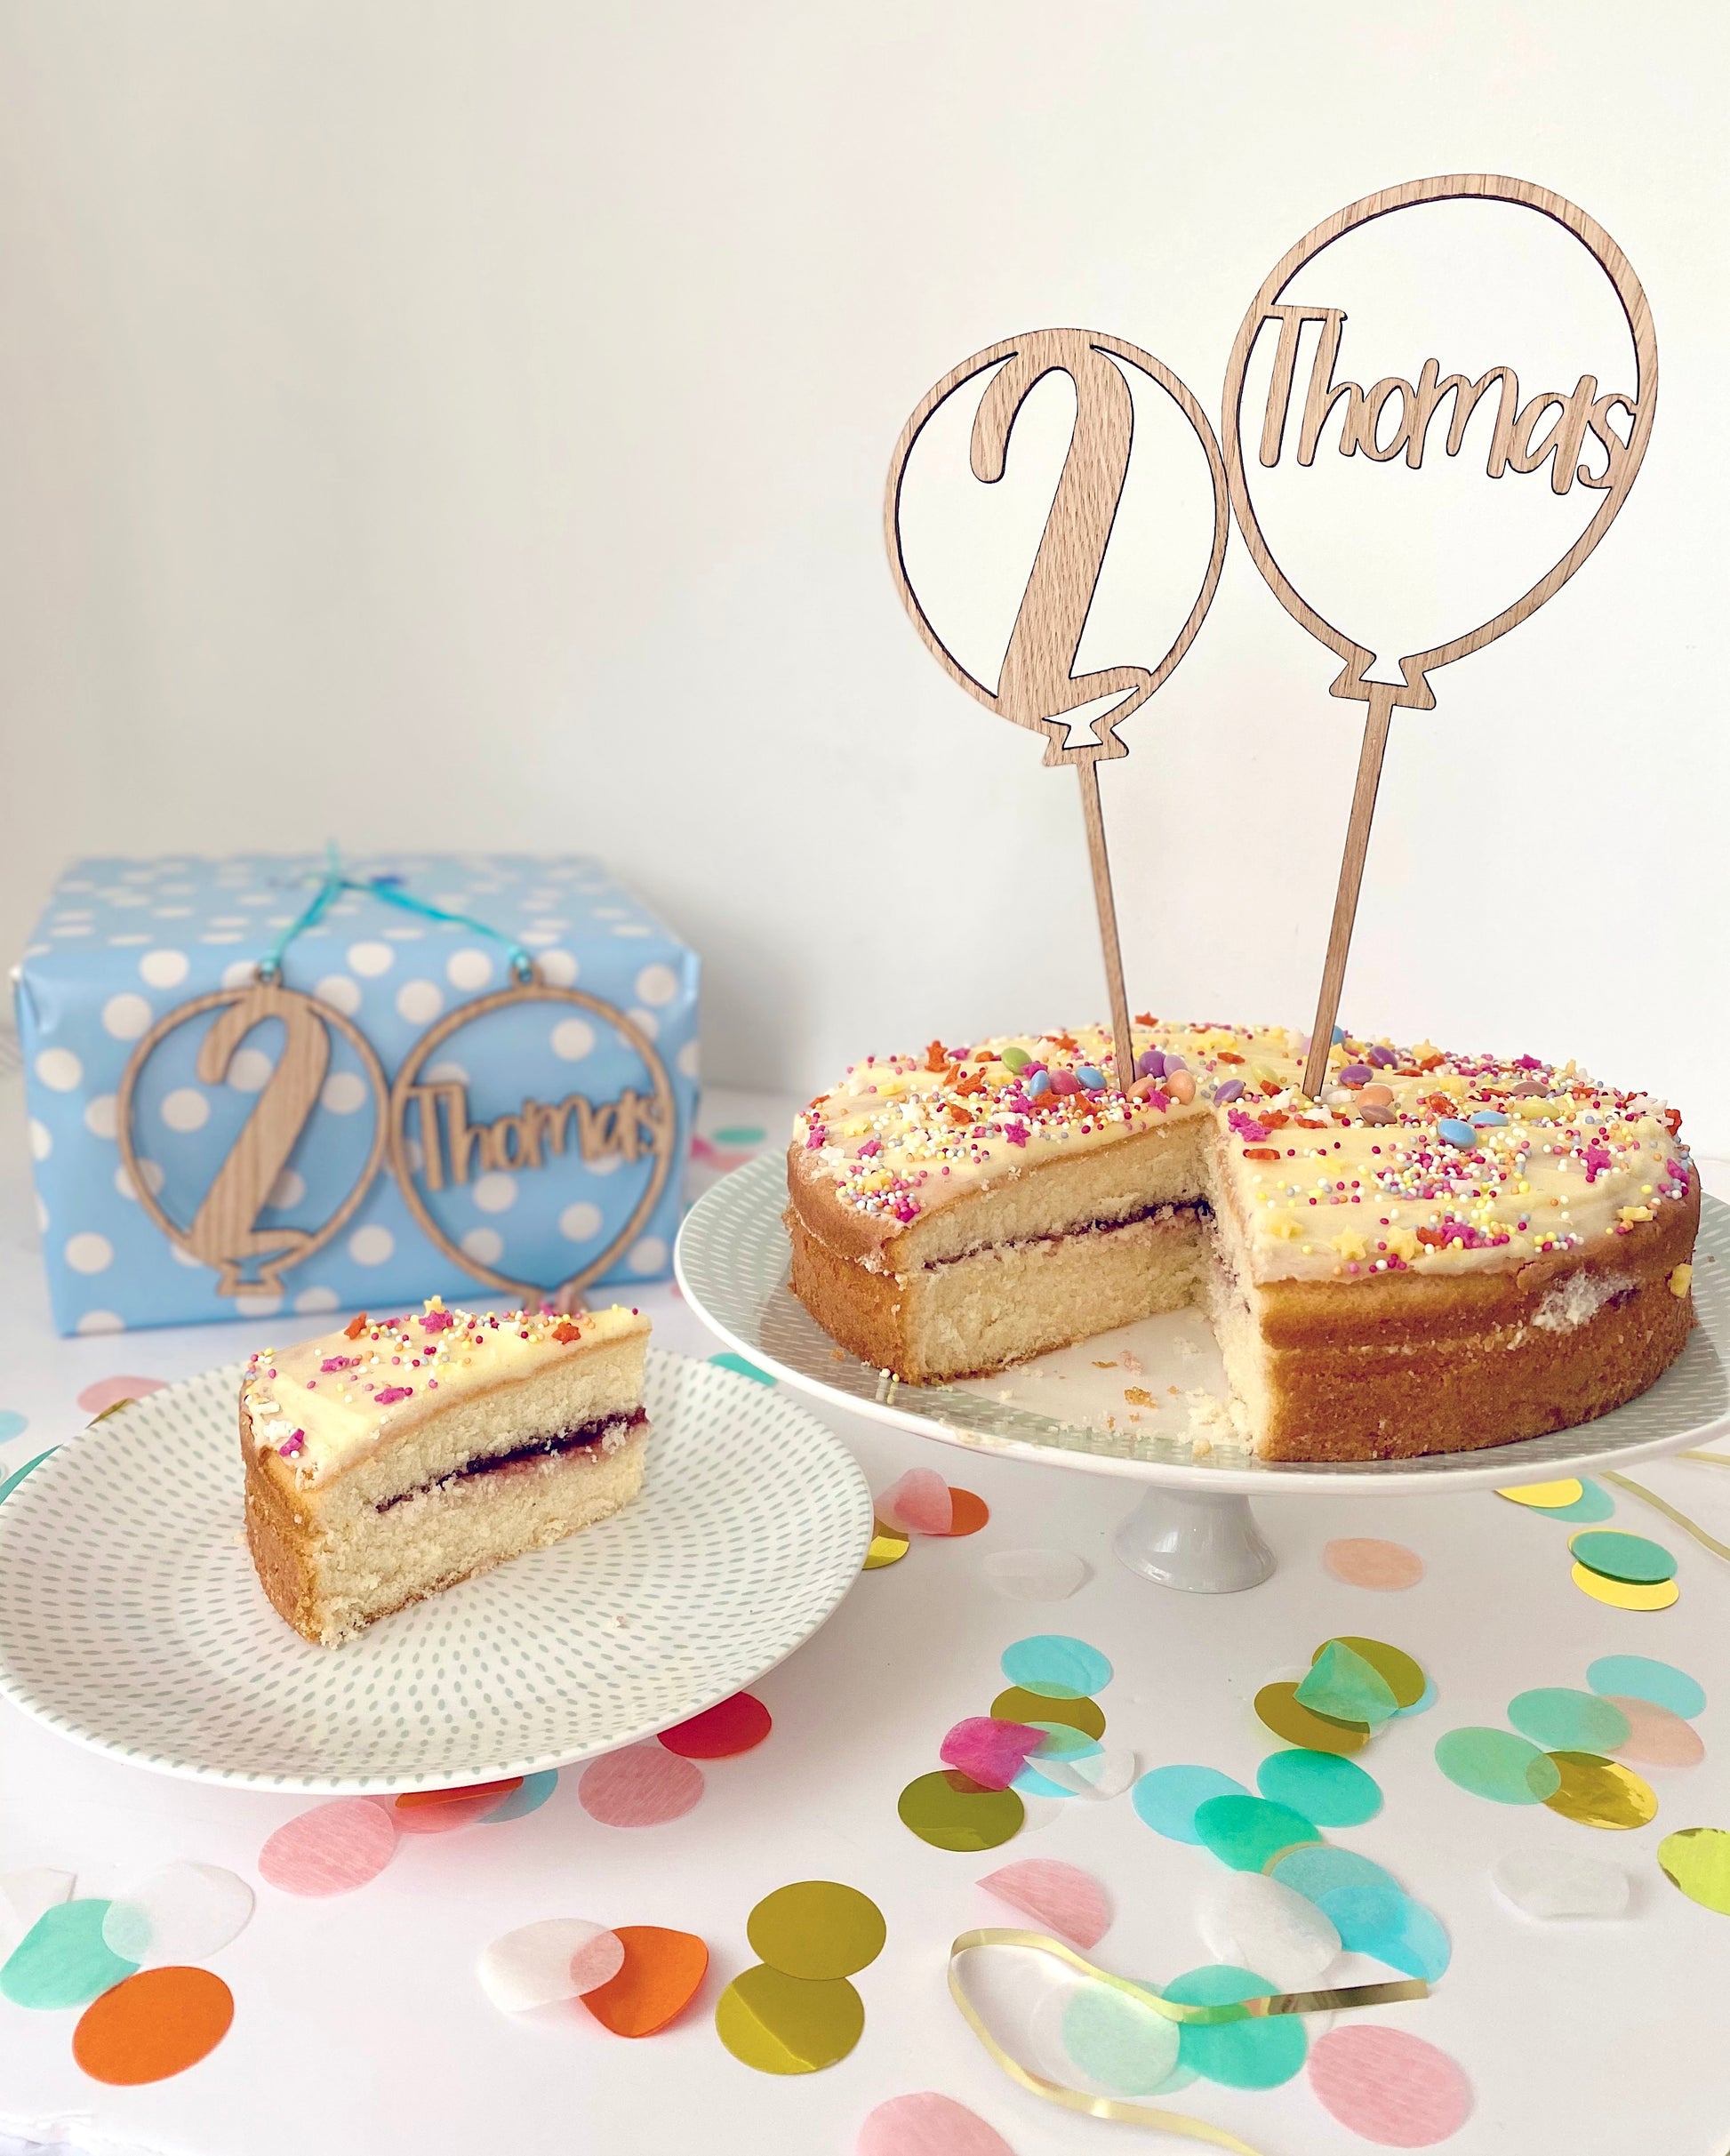 Birthday cake and present with personalised balloon shaped cake toppers and gift tags made from wood